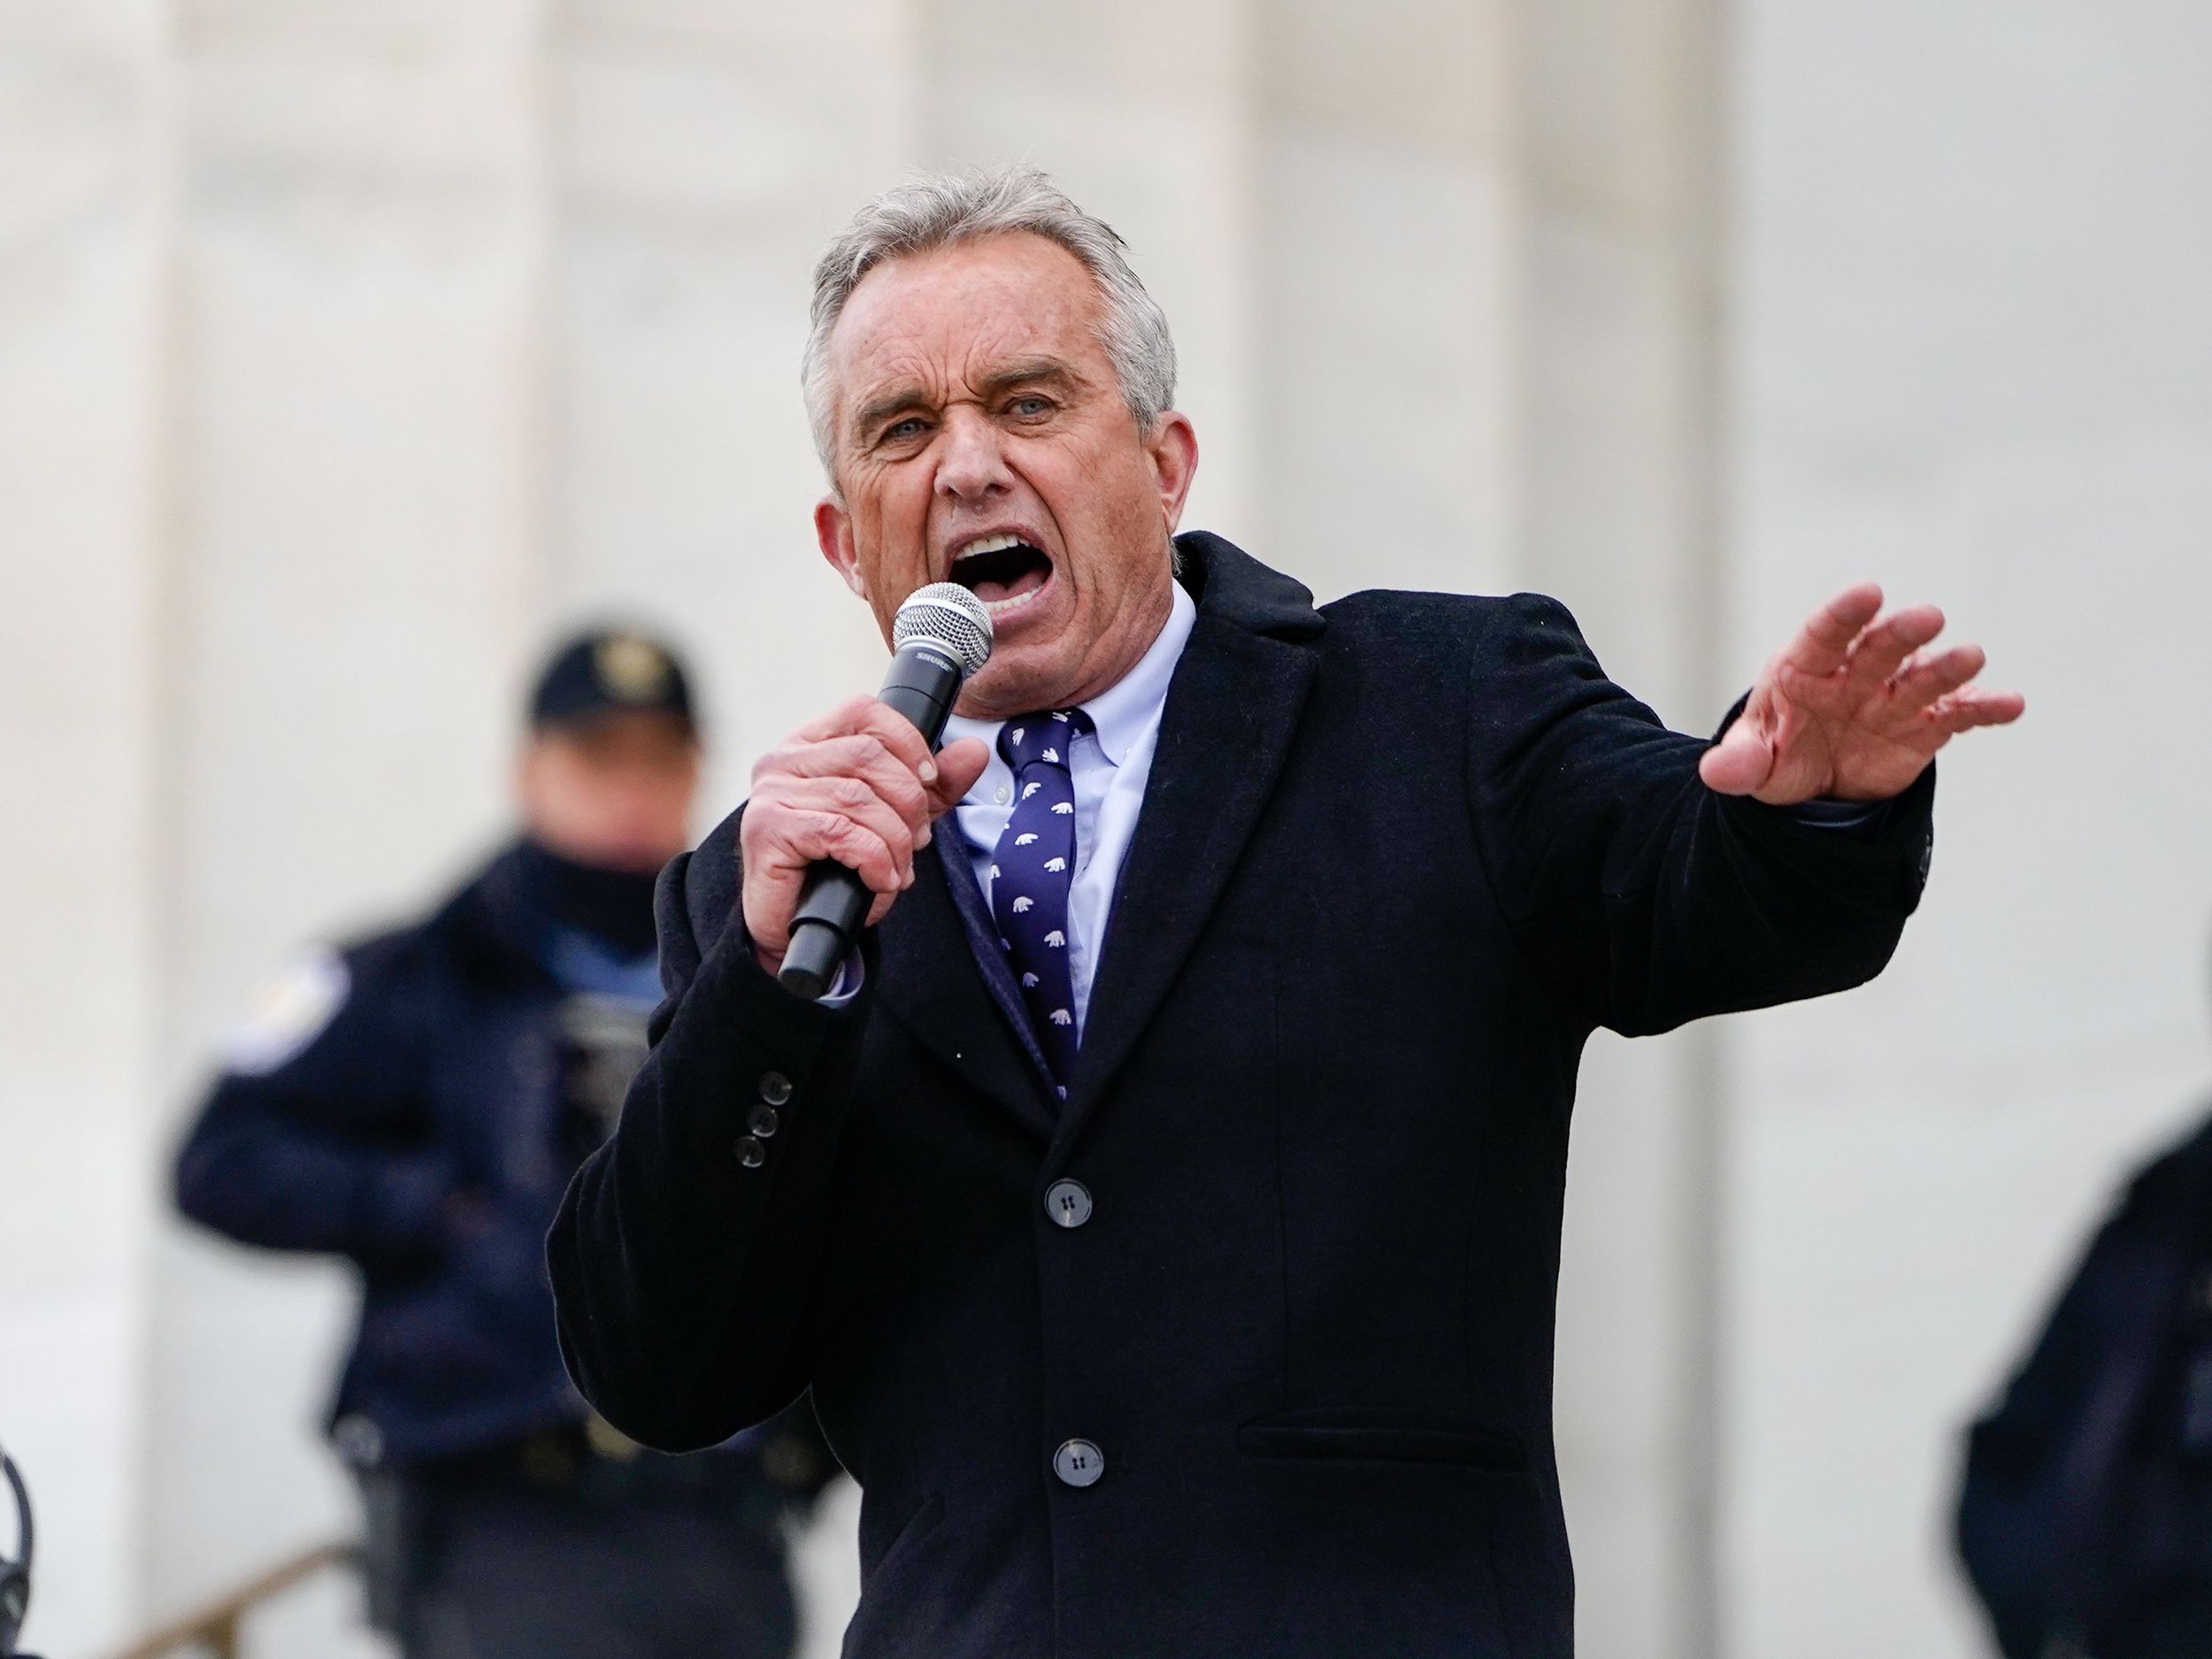 Robert F. Kennedy Jr.'s Unsubstantiated Bioweapon Claims Find Big Audience  in China - WSJ